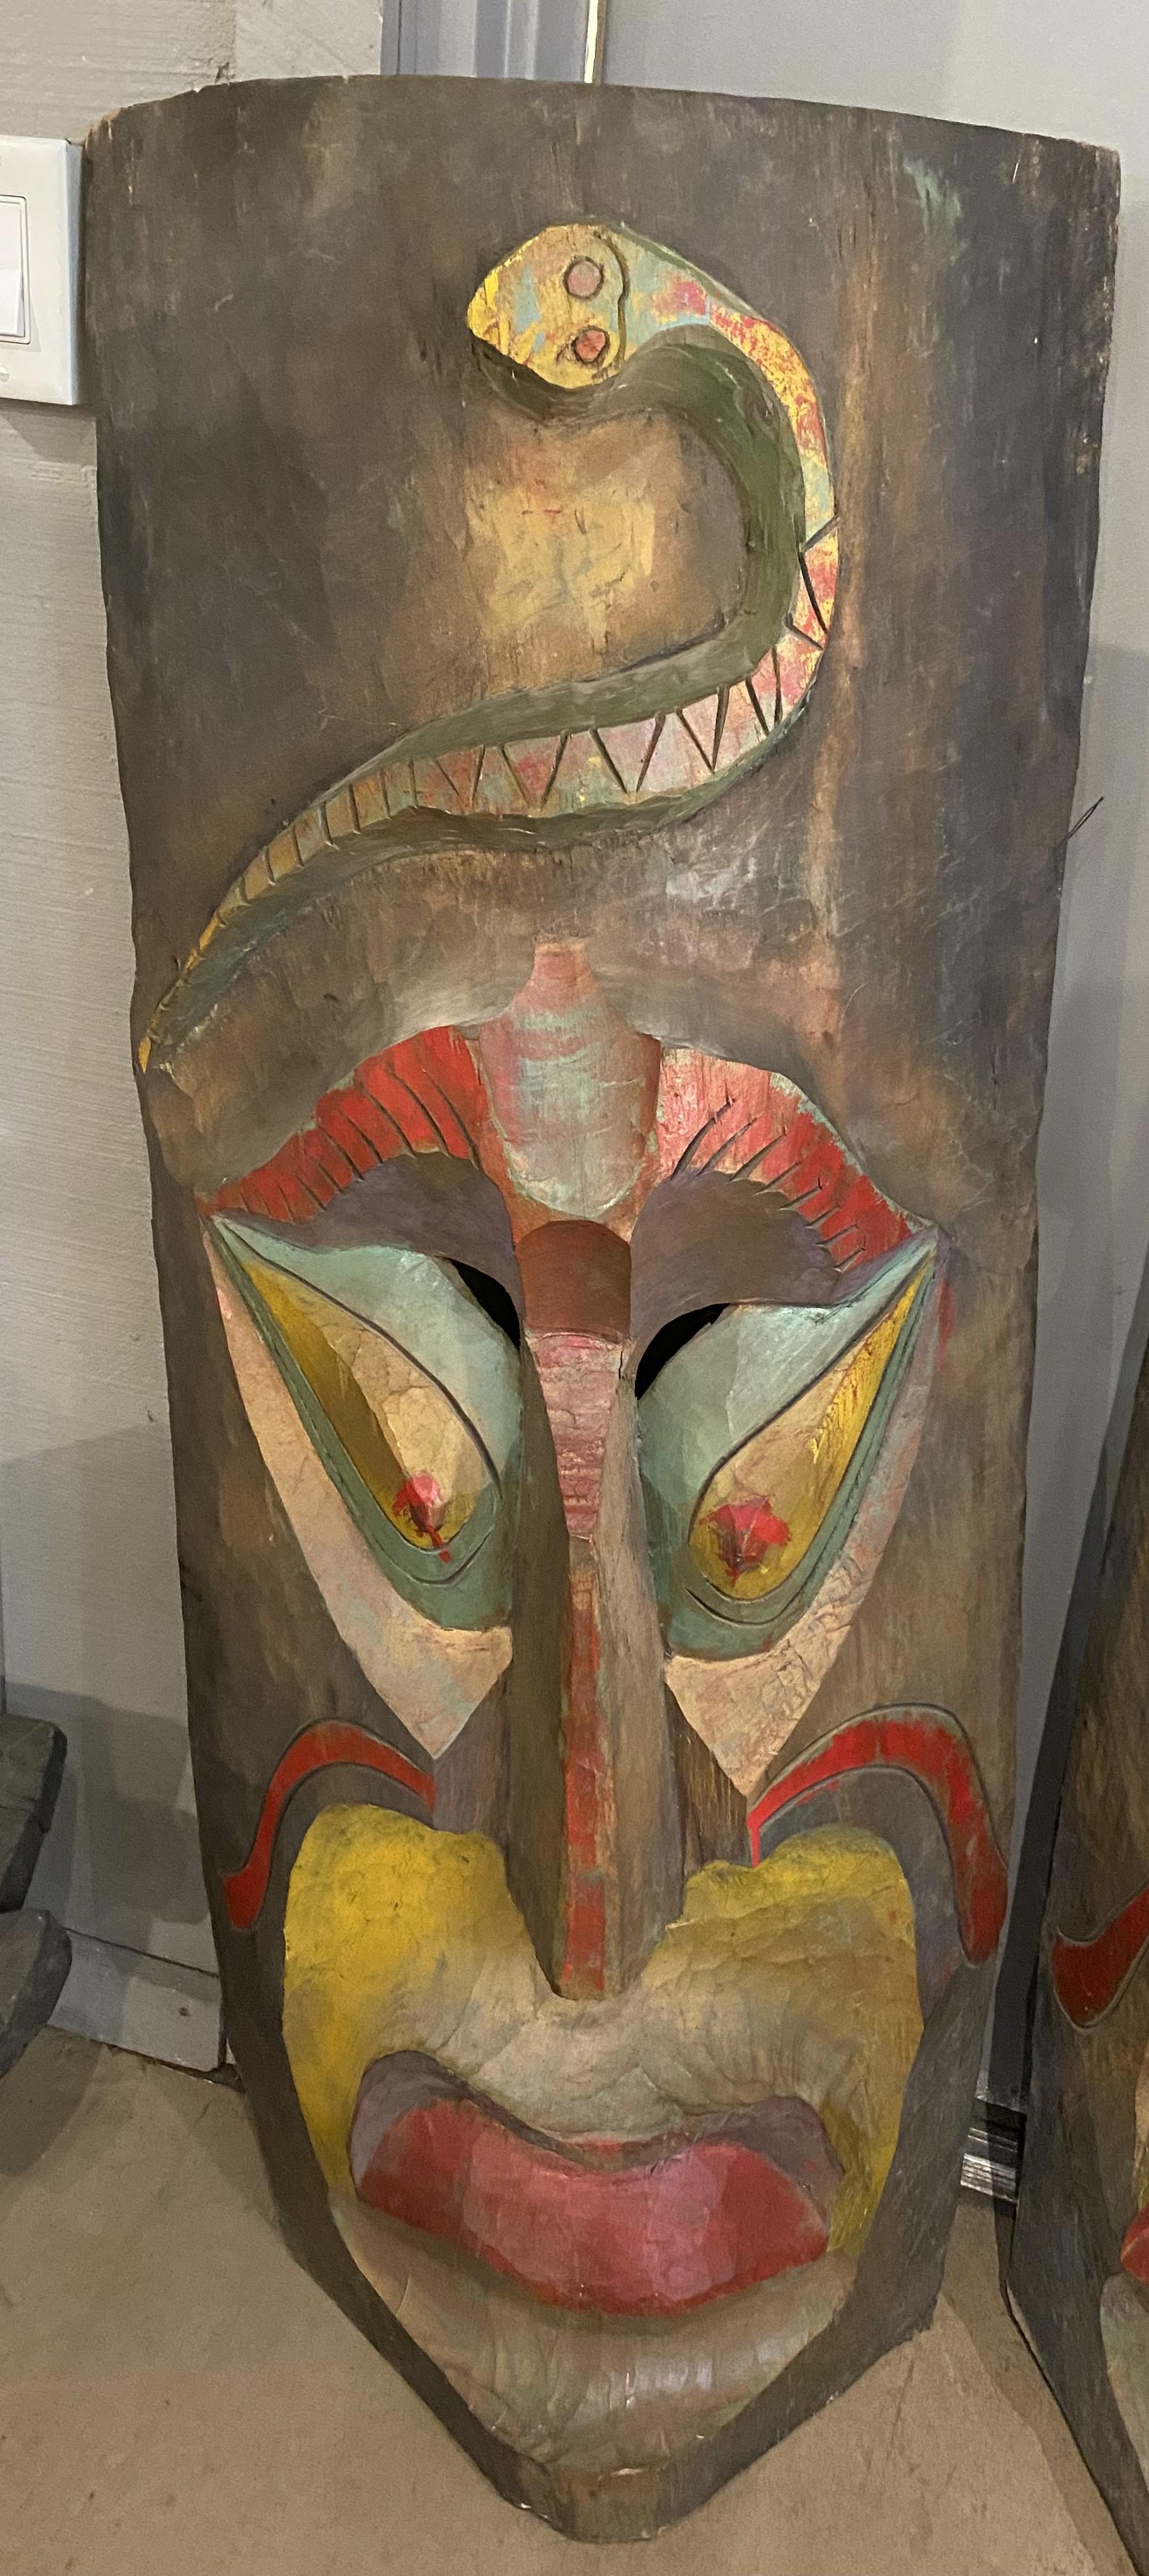 A wonderful pair of vintage oversized polychrome hand carved wooden Tiki mask wall hangings with snakes above the faces dating to probably to the mid 20th century. Very good overall condition, with minor losses and wear commensurate with age and